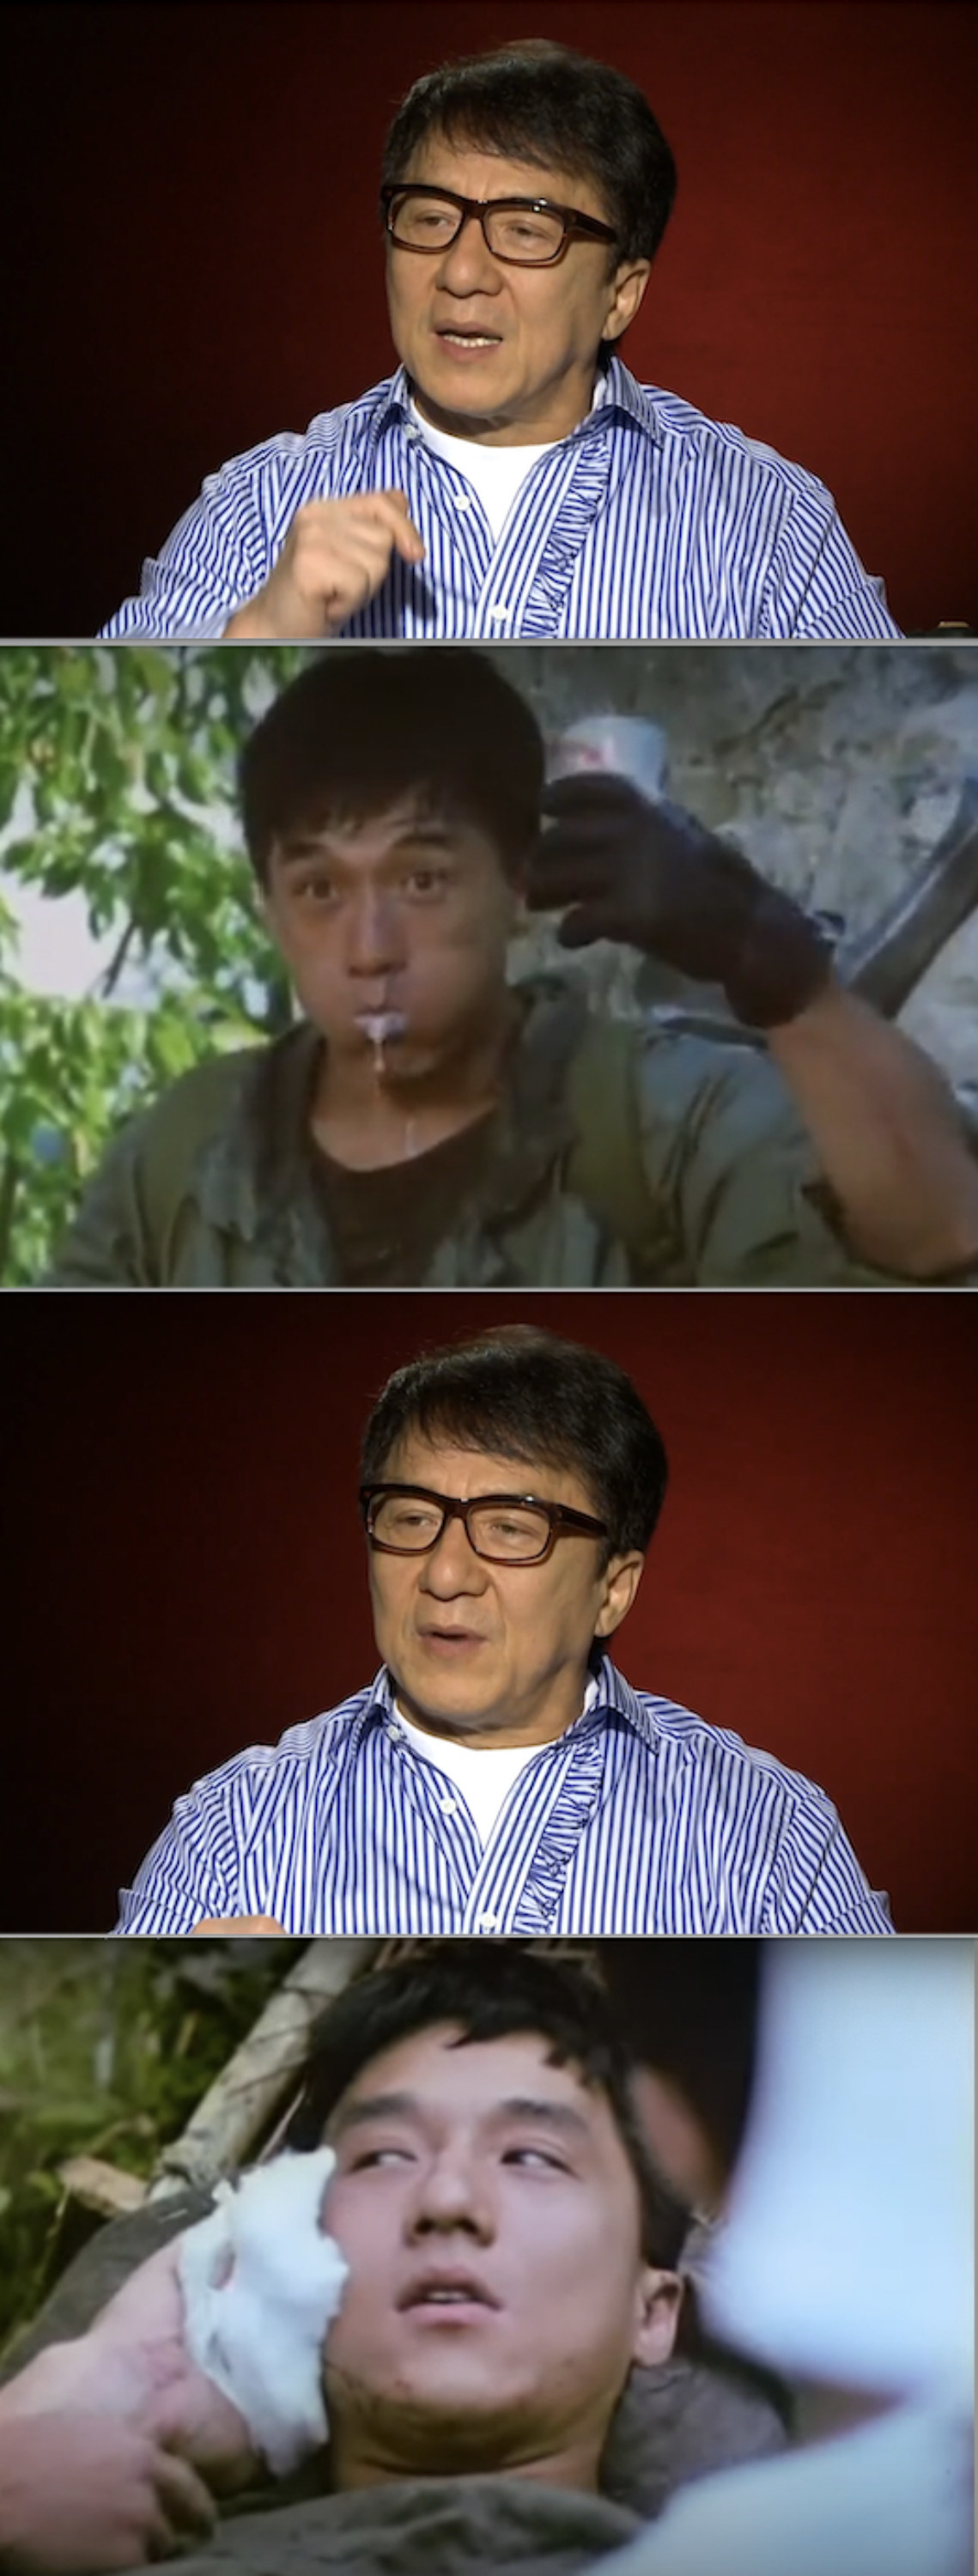 Jackie Chan being interviewed, as well as blooper stills from the movie &quot;Armour of God&quot; with Jackie drinking beer and lying on the ground